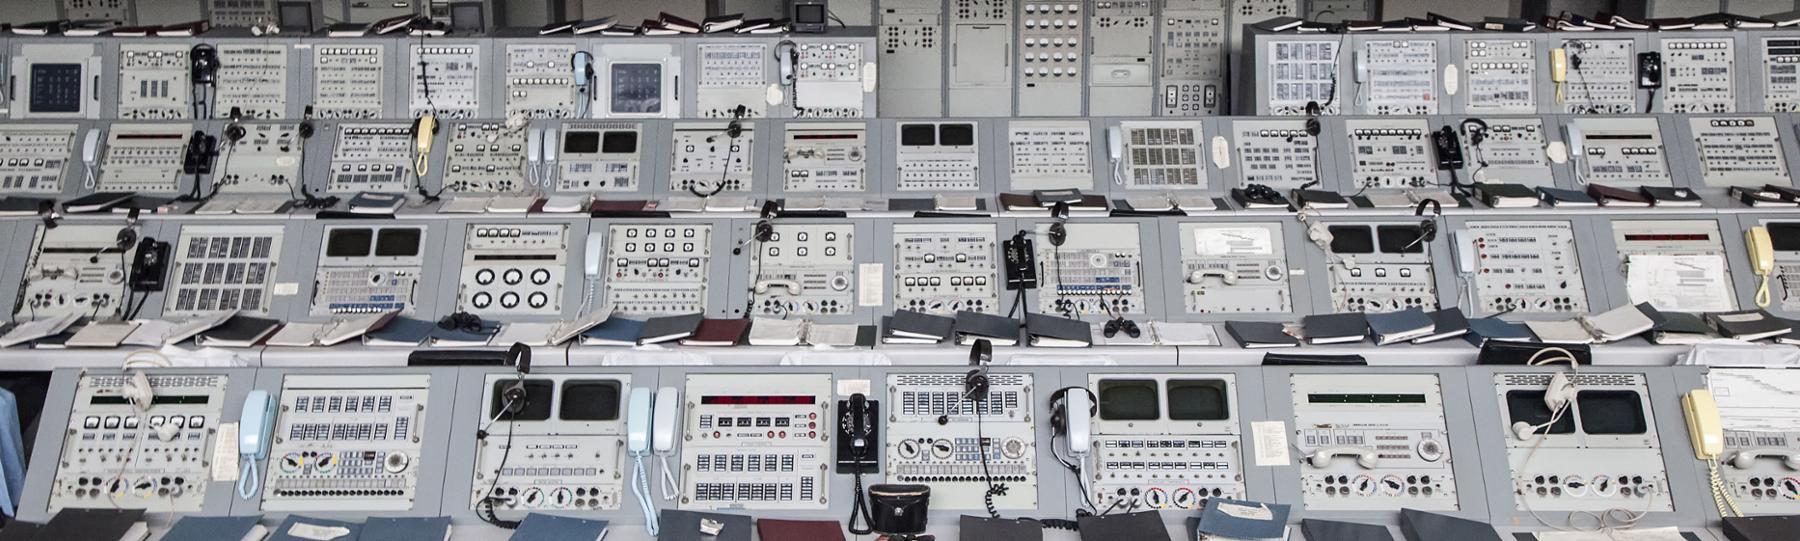  1960s-era NASA mission control equipment on display in Kennedy Space Center